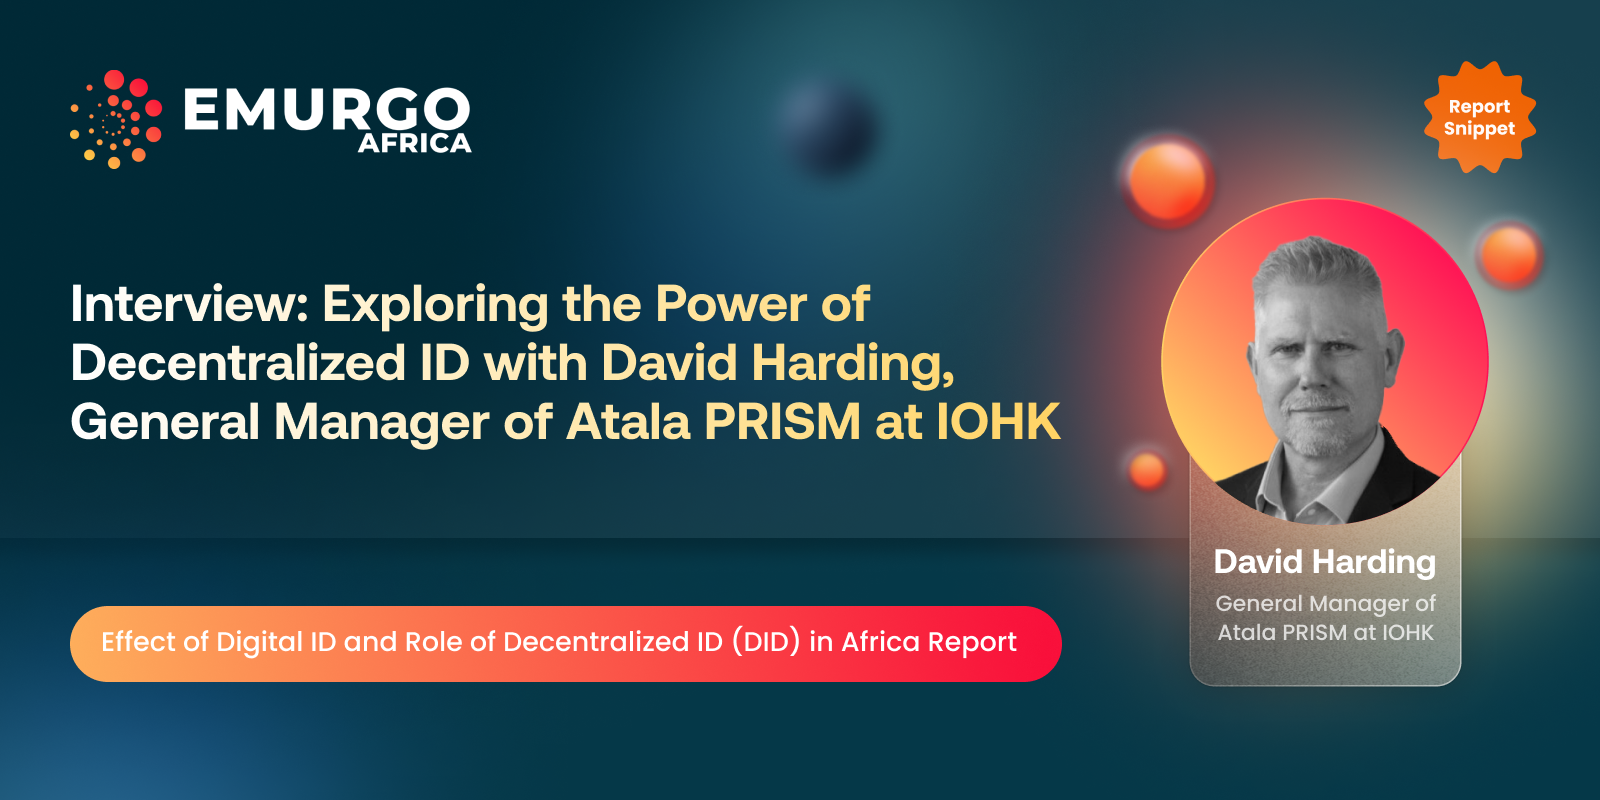 Interview: Exploring the Power of Decentralized ID with David Harding, General Manager of Atala PRISM at IOHK